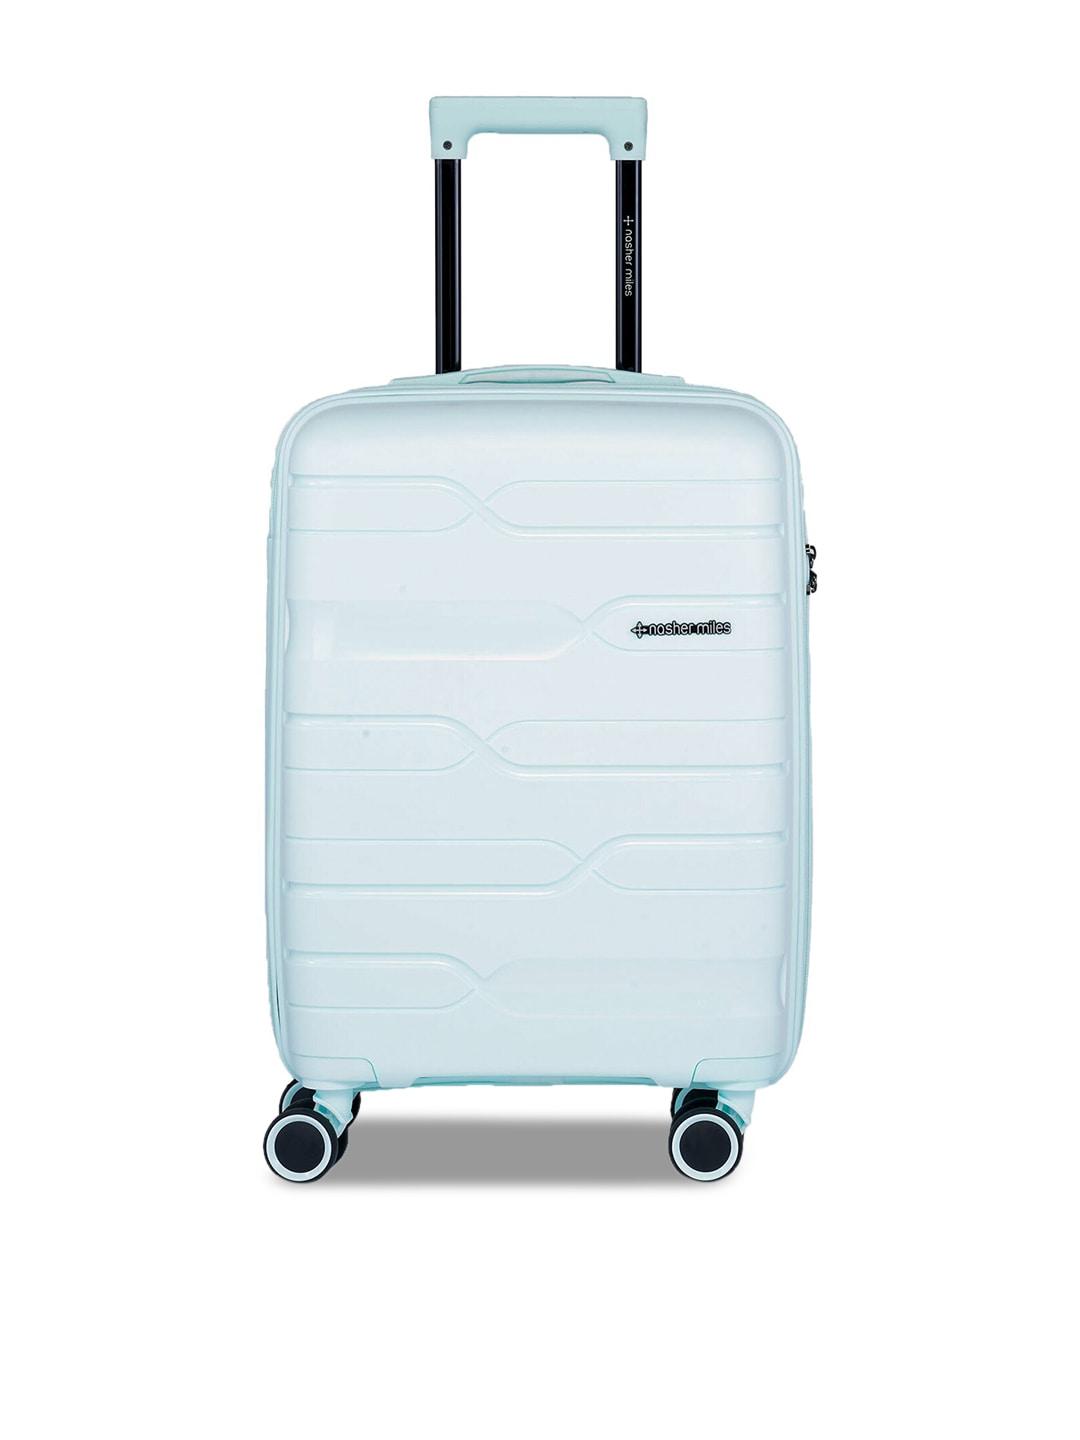 nasher miles green textured hard-sided large trolley suitcase